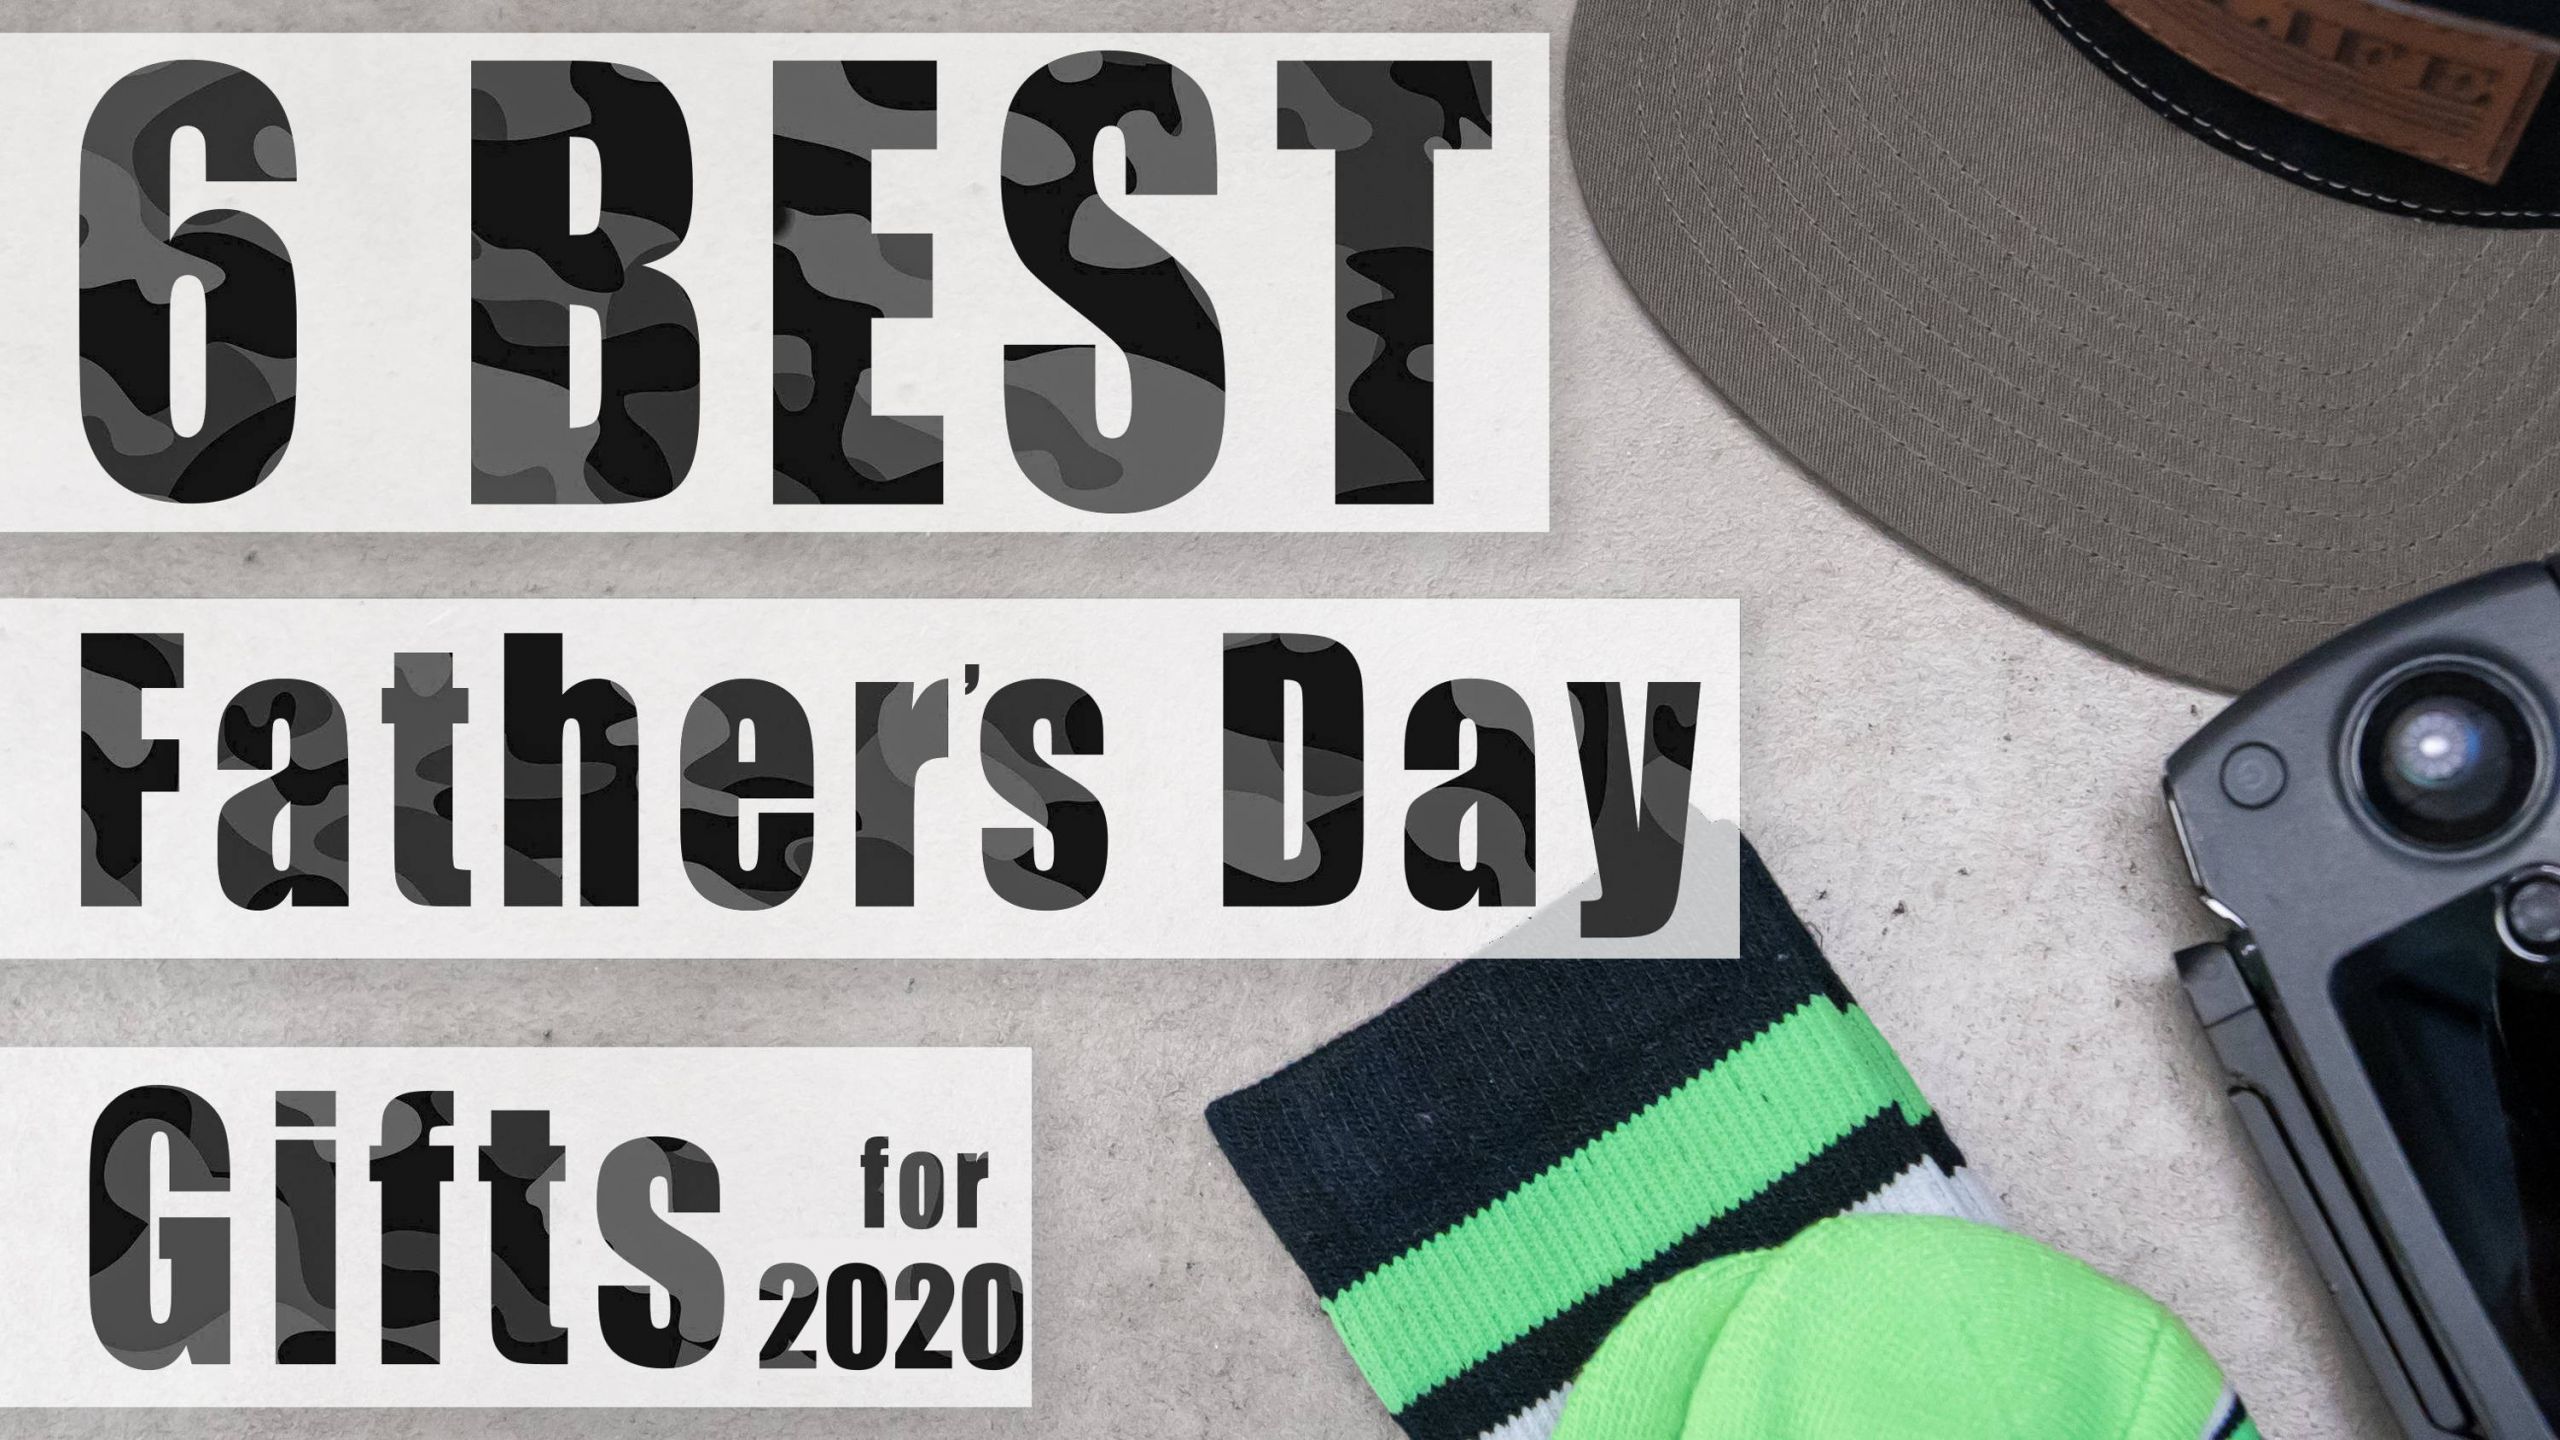 Fathers Day 2020 Gift
 Top 6 Best Father’s Day Gifts for 2020